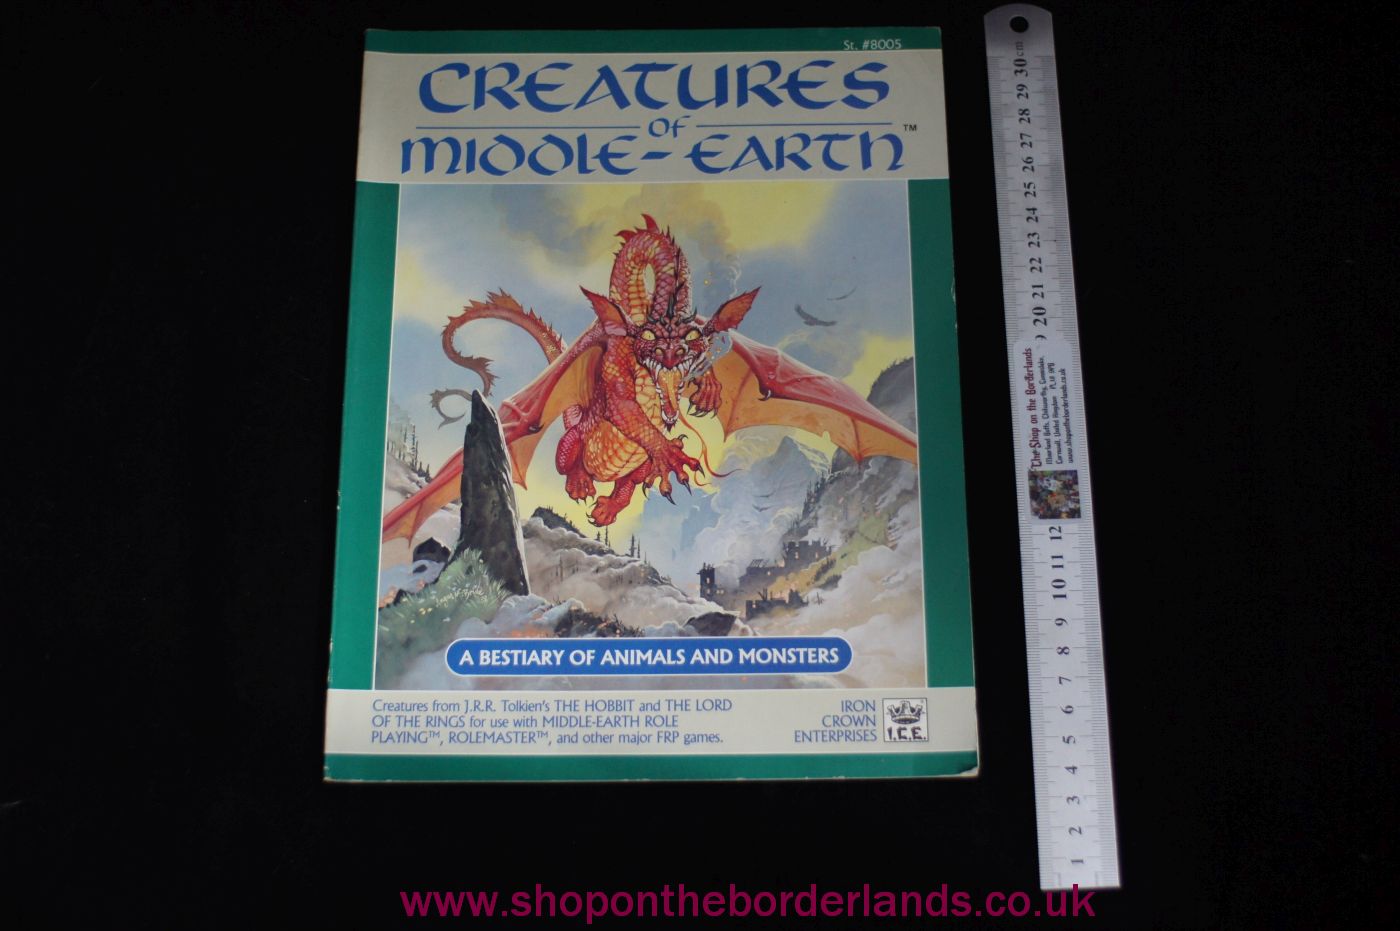 Creatures of Middle Earth A Bestiary of Animals and Monsters